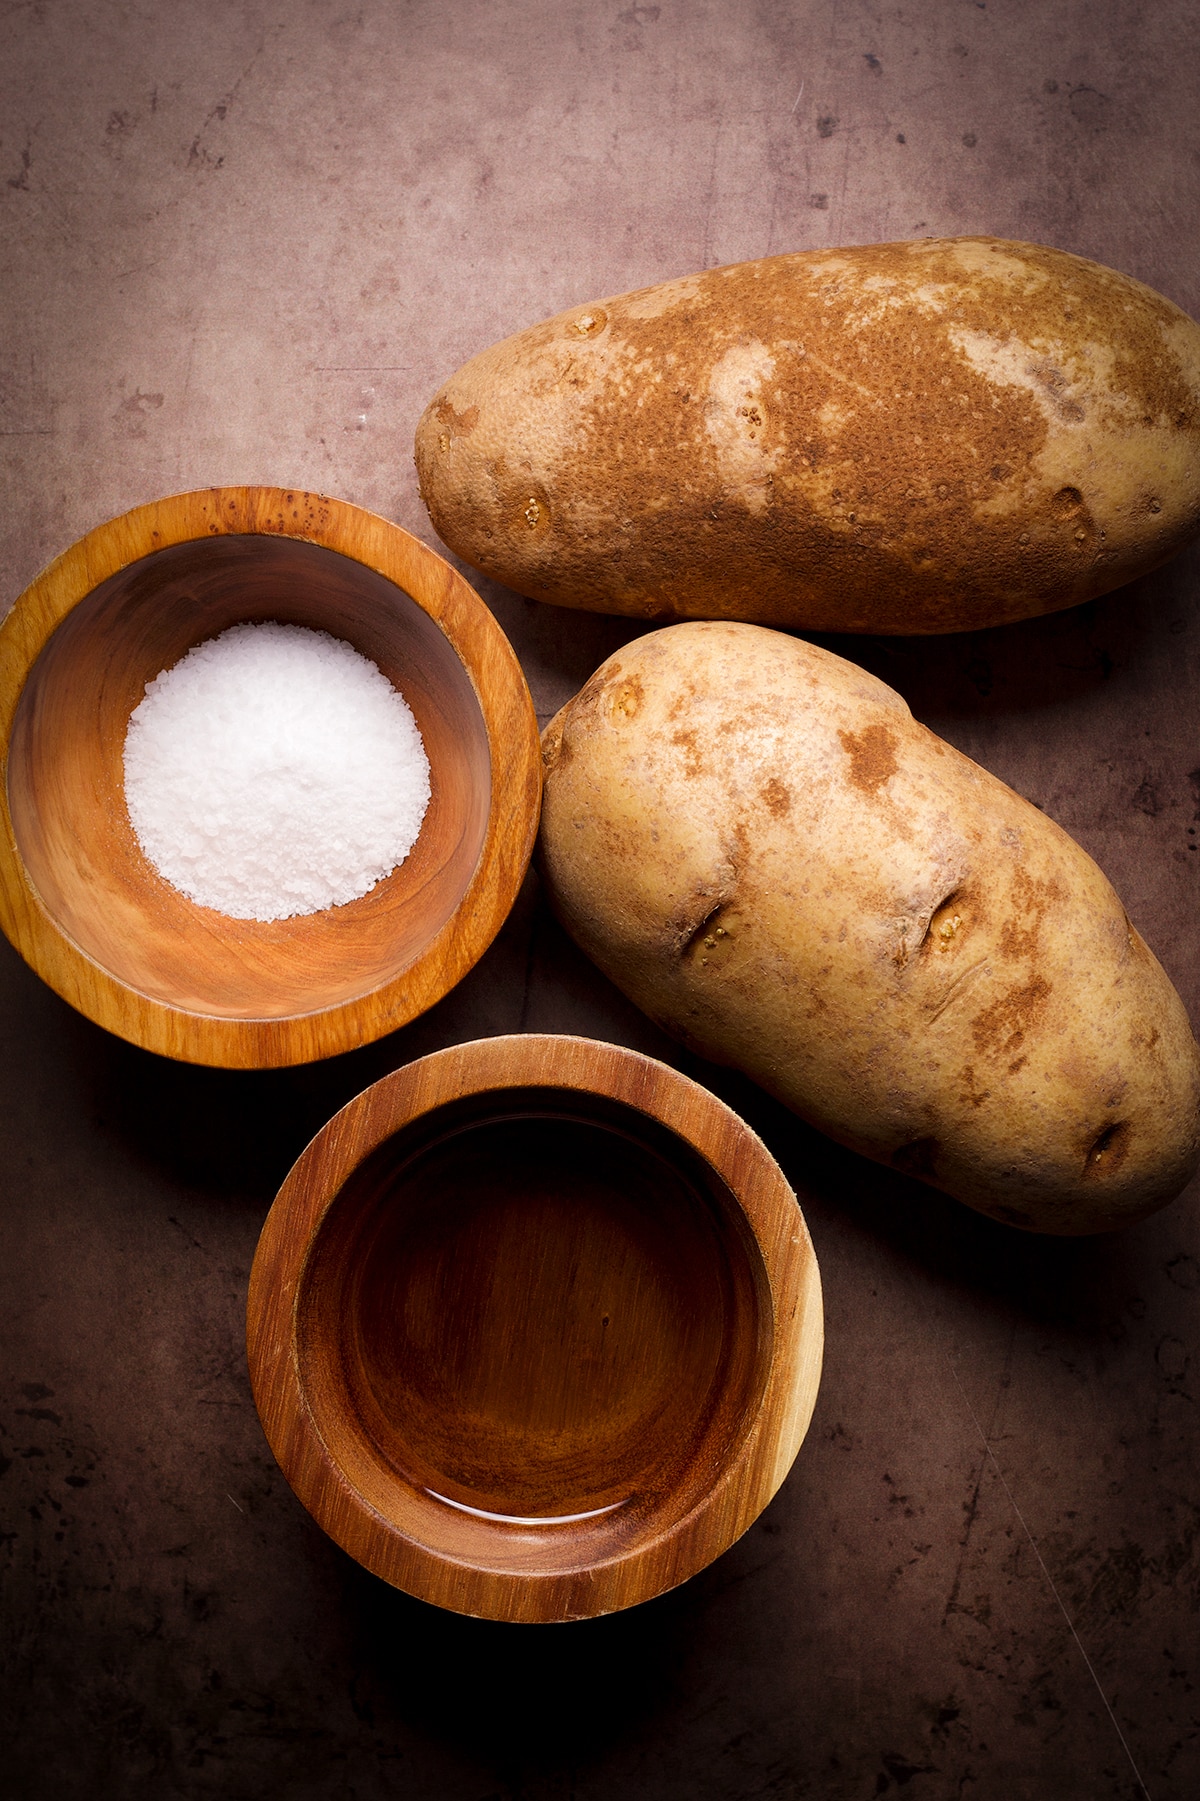 All the ingredients you need to make baked potatoes.